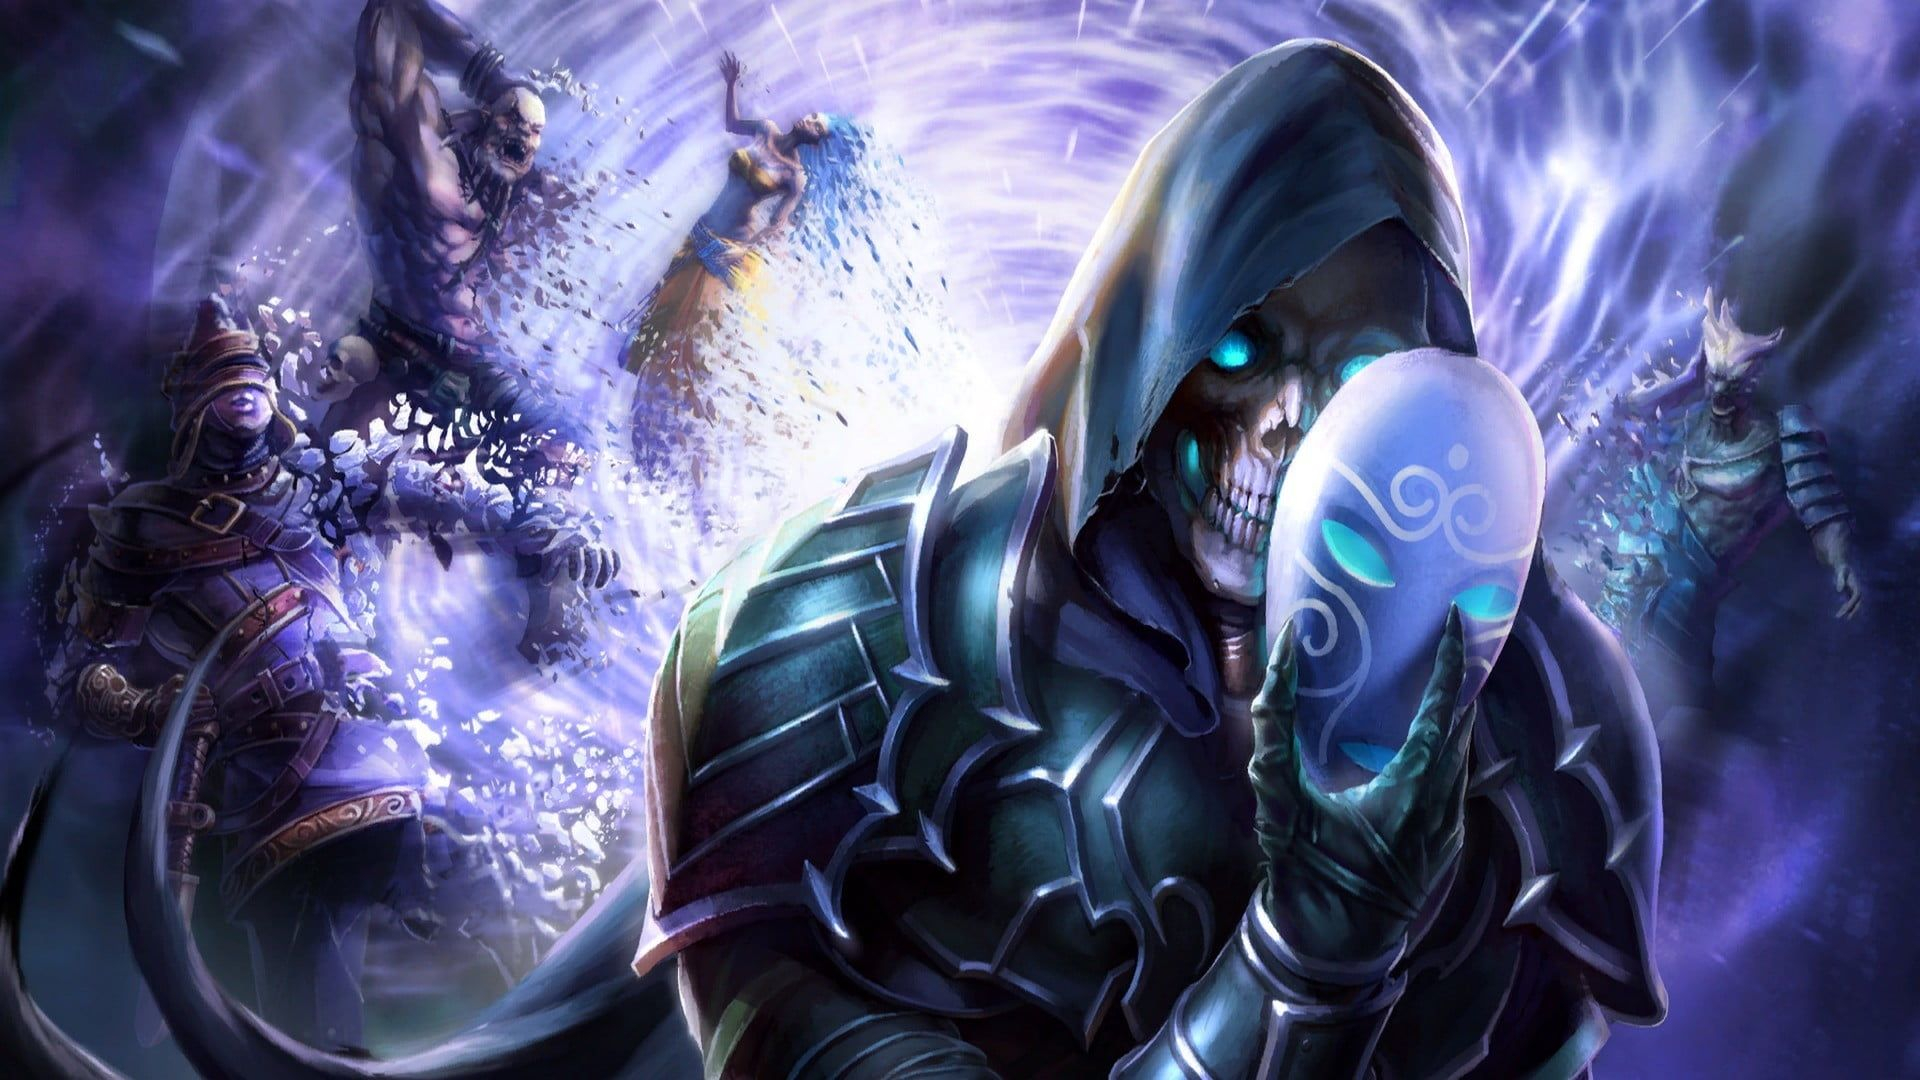 1920x1080 skeleton man wearing armor suit and hooded cape digital wallpaper # necromancer Heroes of Might and Magic 6 #San&acirc;&#128;&brvbar; | Suit of armor, Hood wallpapers, Digital wallpaper